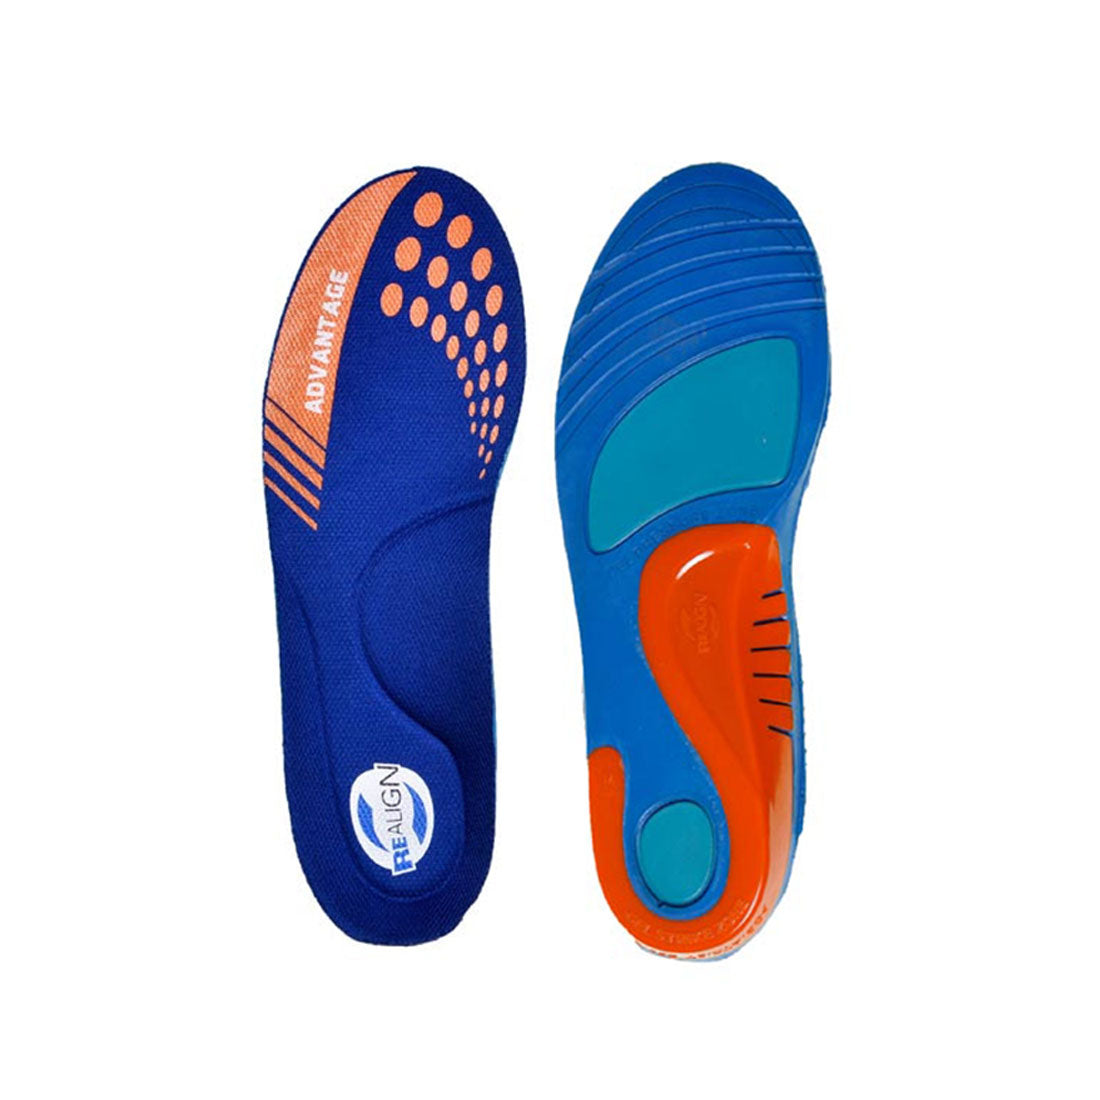 Realign Advantage Innersole Insoles and Fitting Aids